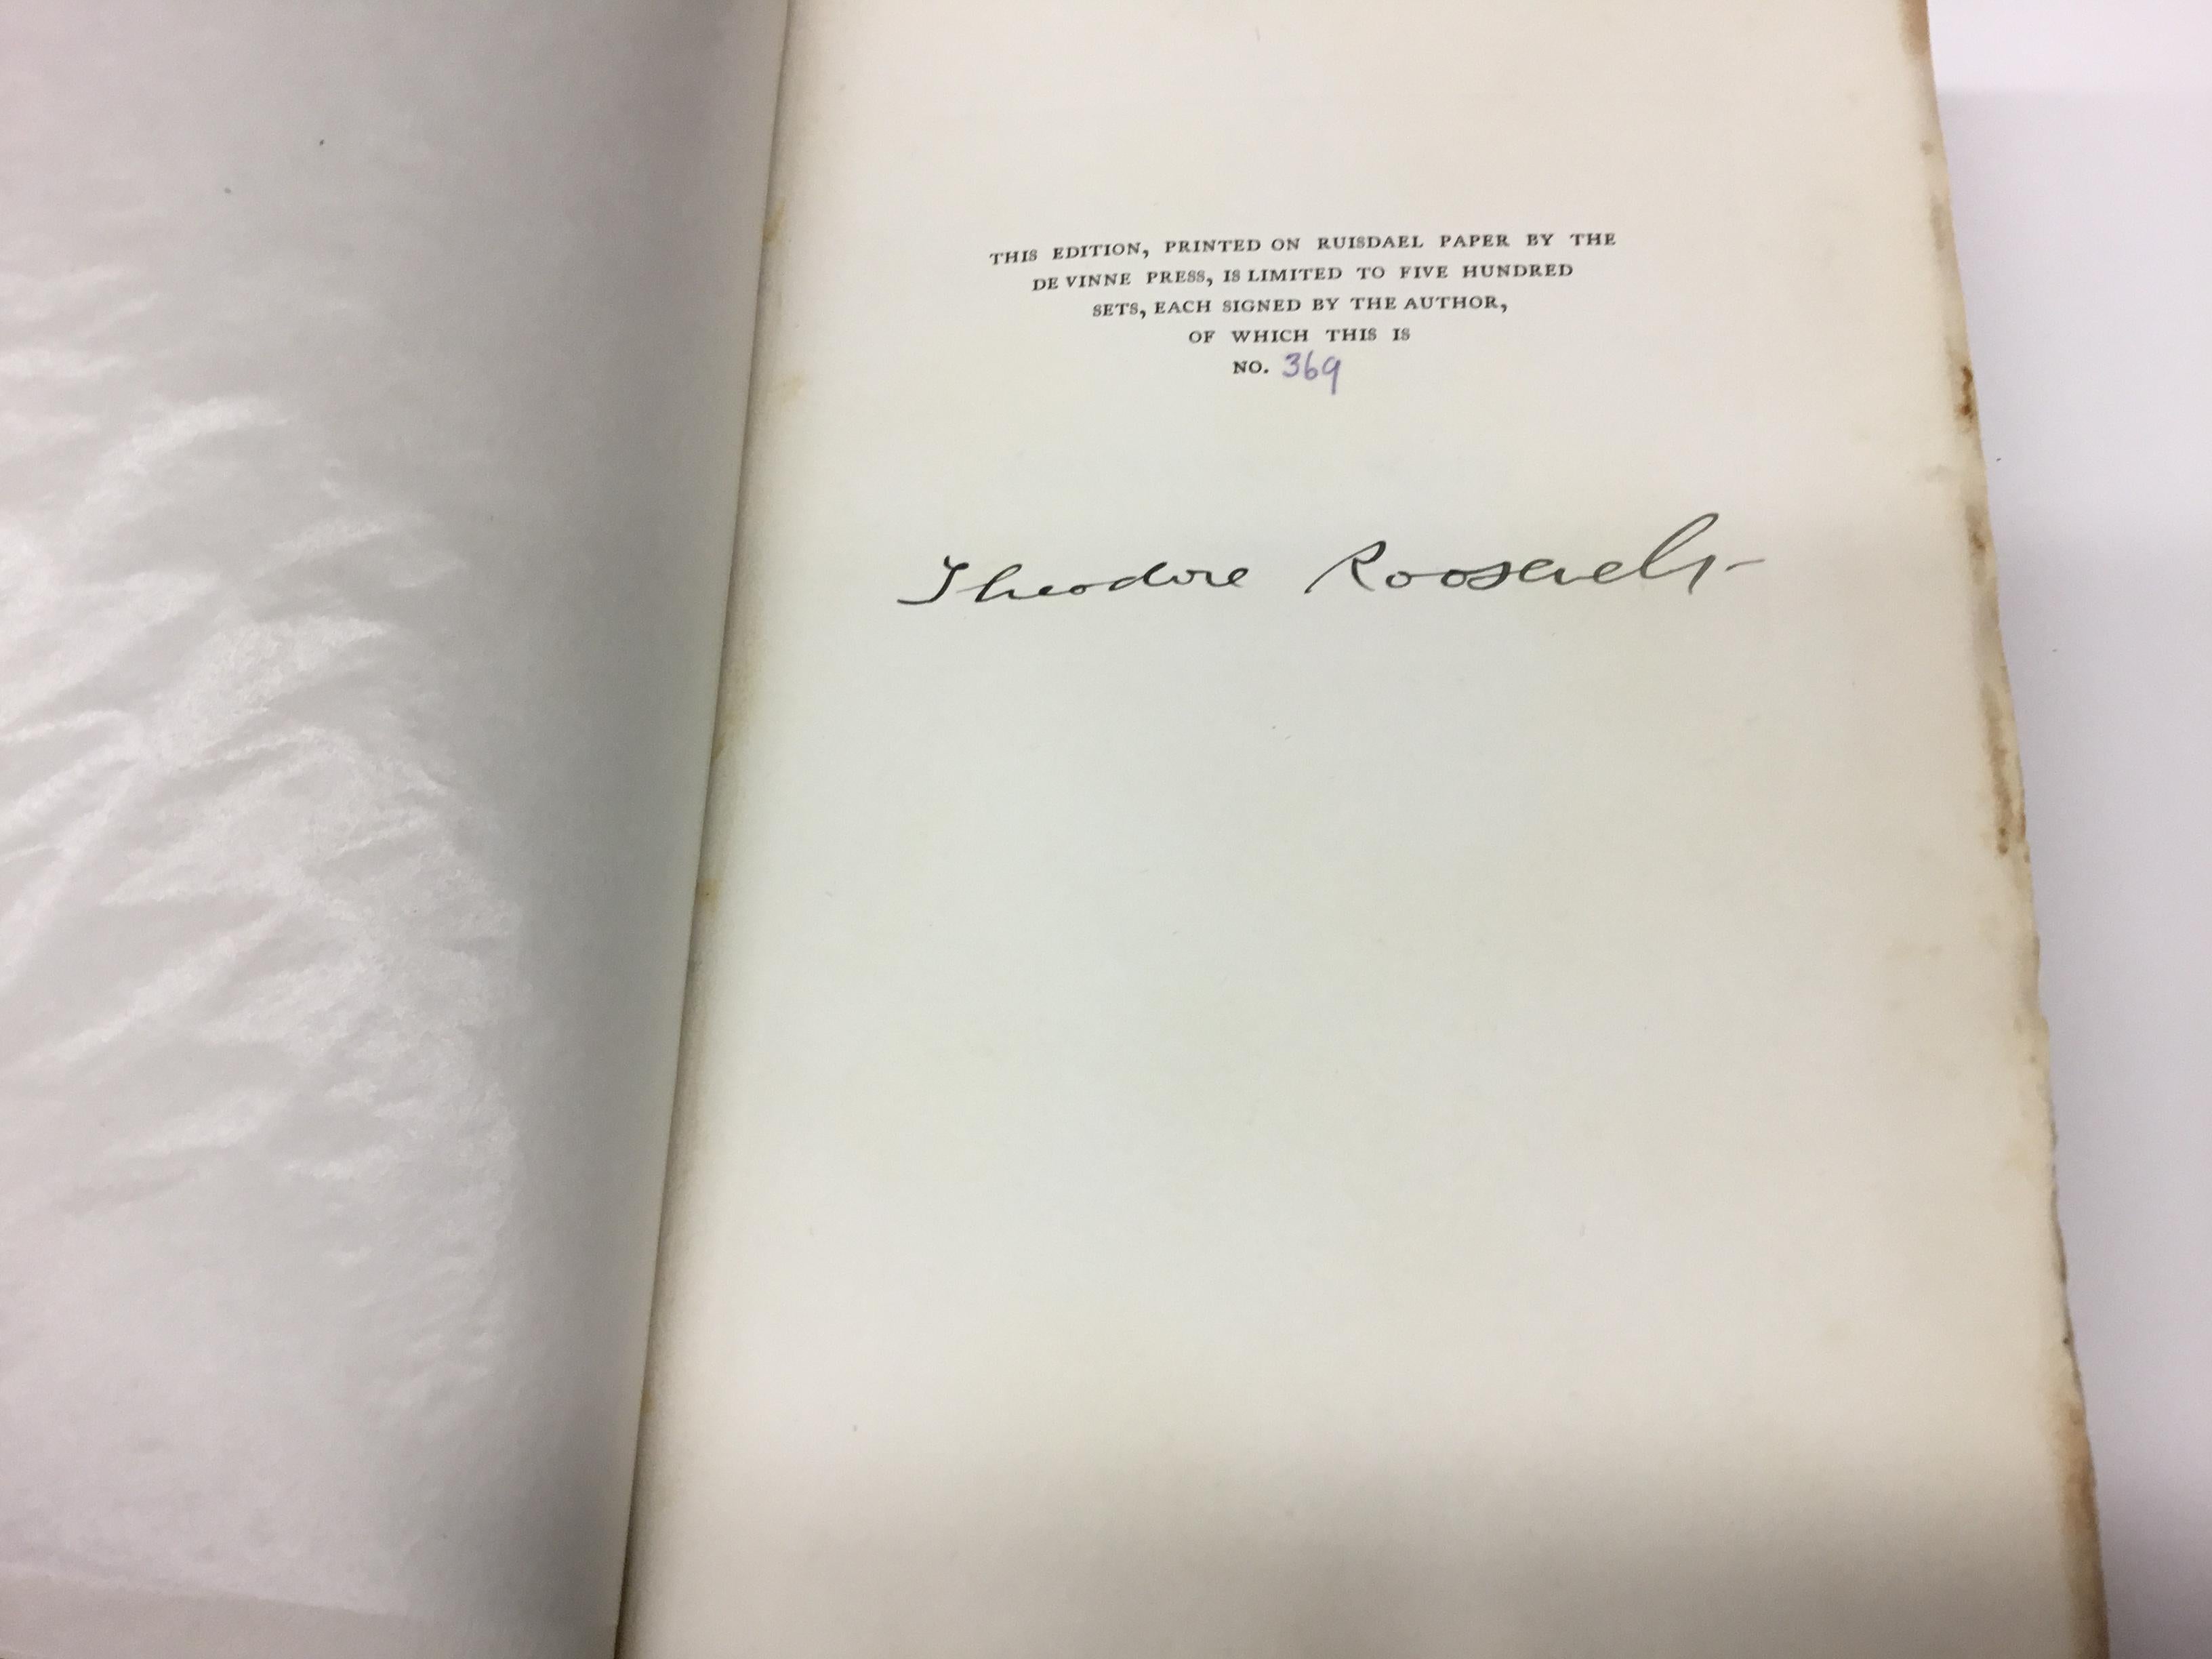 This is a signed Volume I (of two volumes) first edition printing of Theodore Roosevelt's African Game Trails. Published in New York by Charles Scribners Sons, 1910, this illustrated printing was limited to just 500 signed copies, of which this is